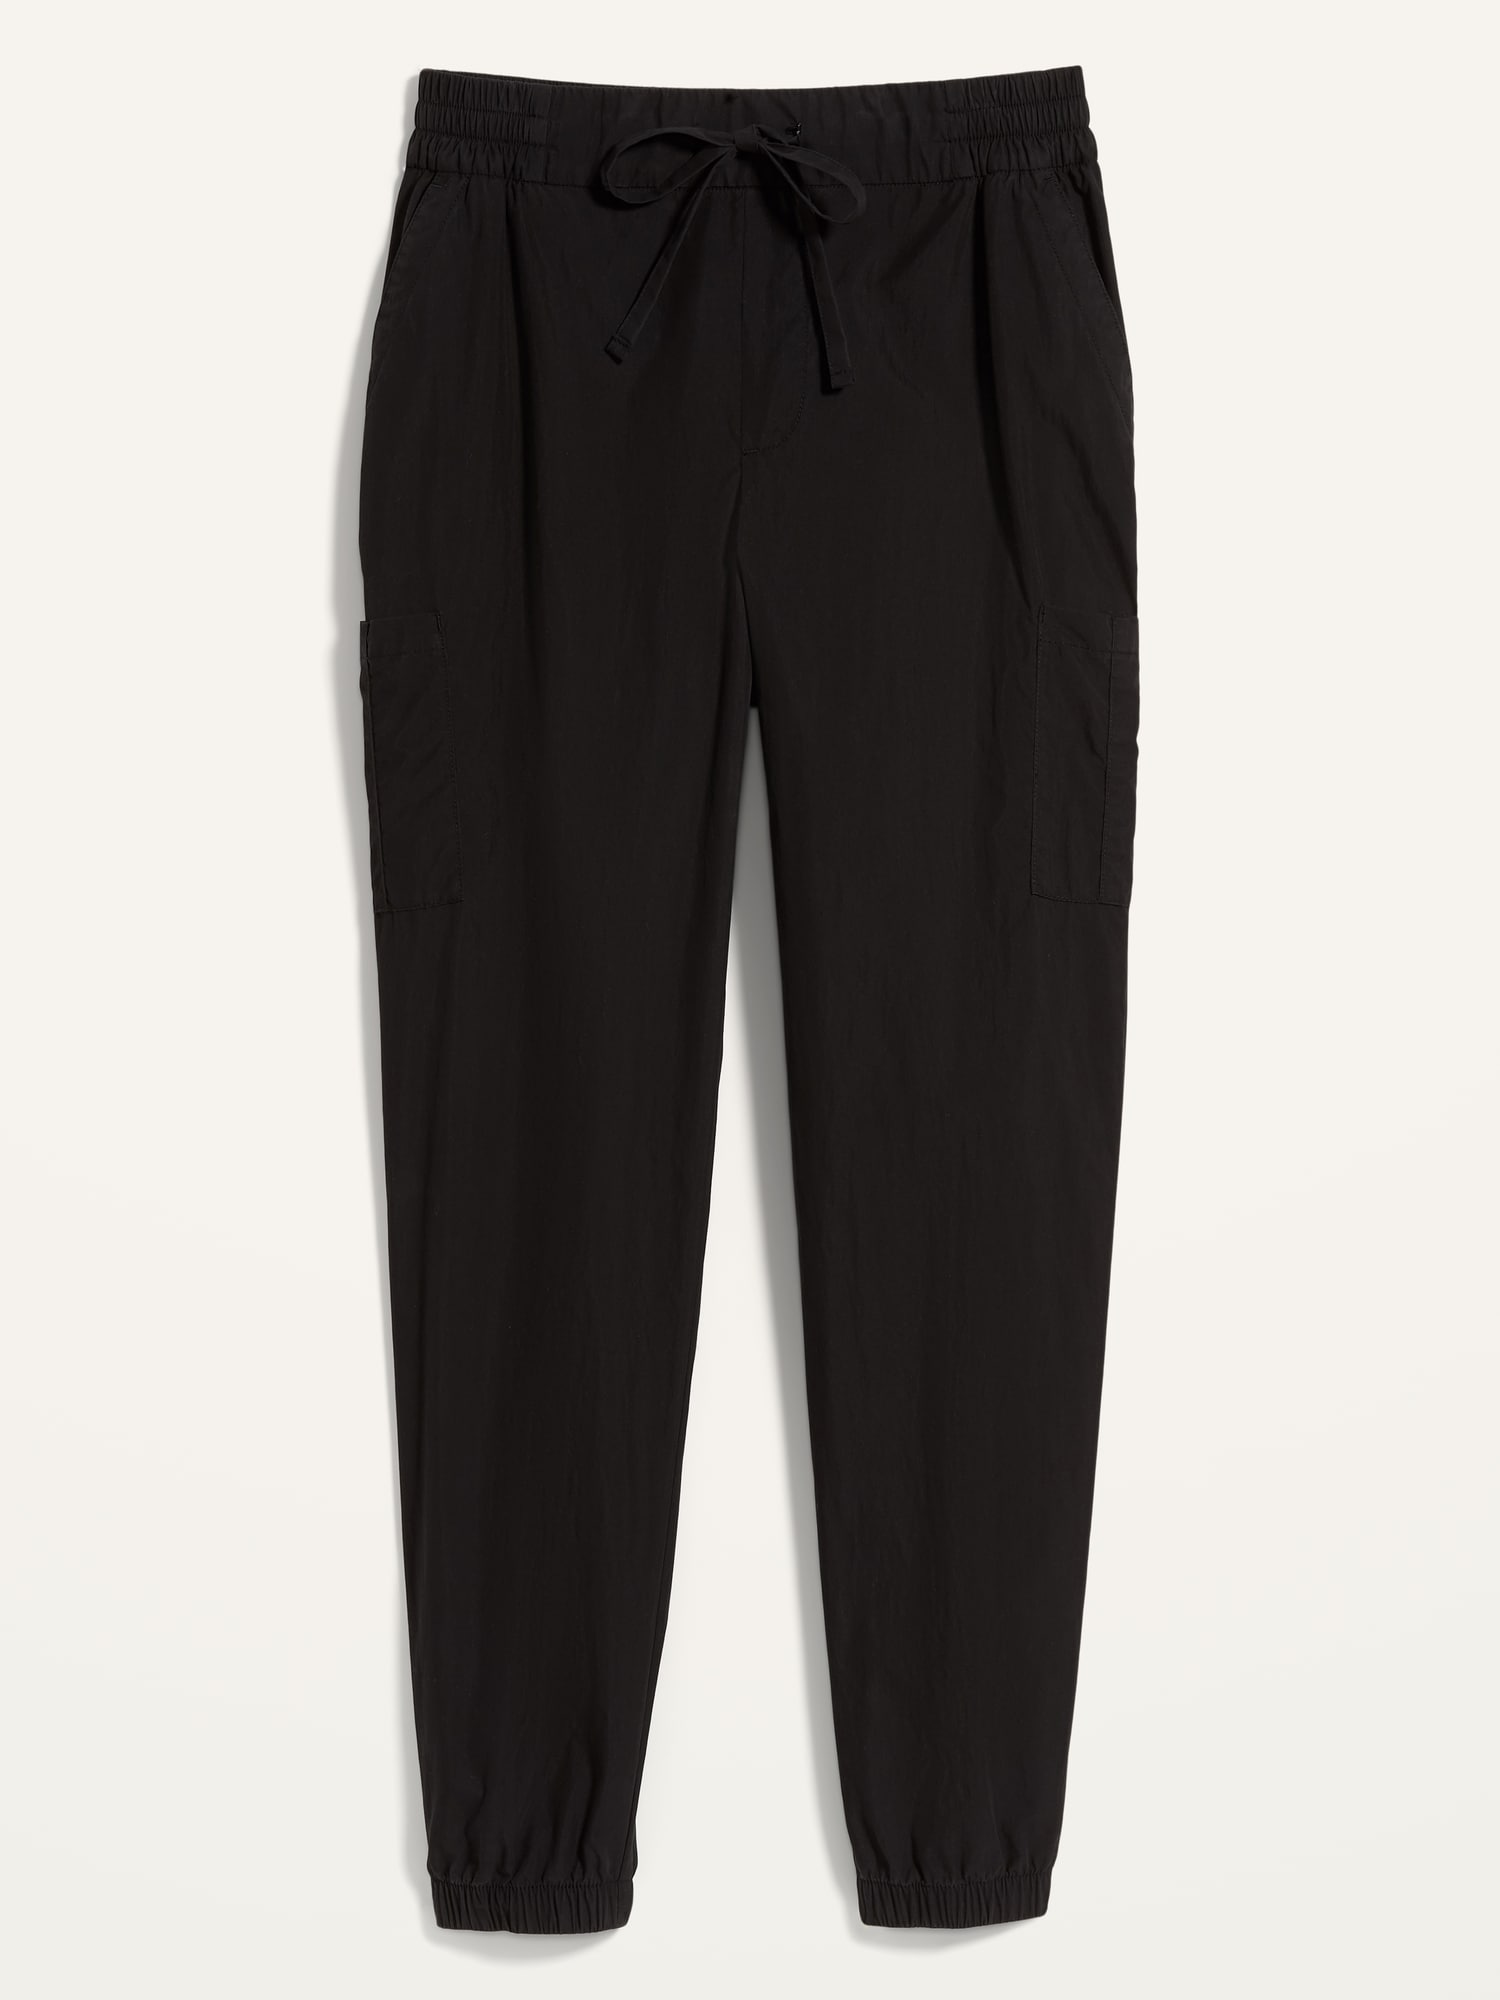 High-Waisted Poplin Tapered Jogger Cargo Pants for Women | Old Navy